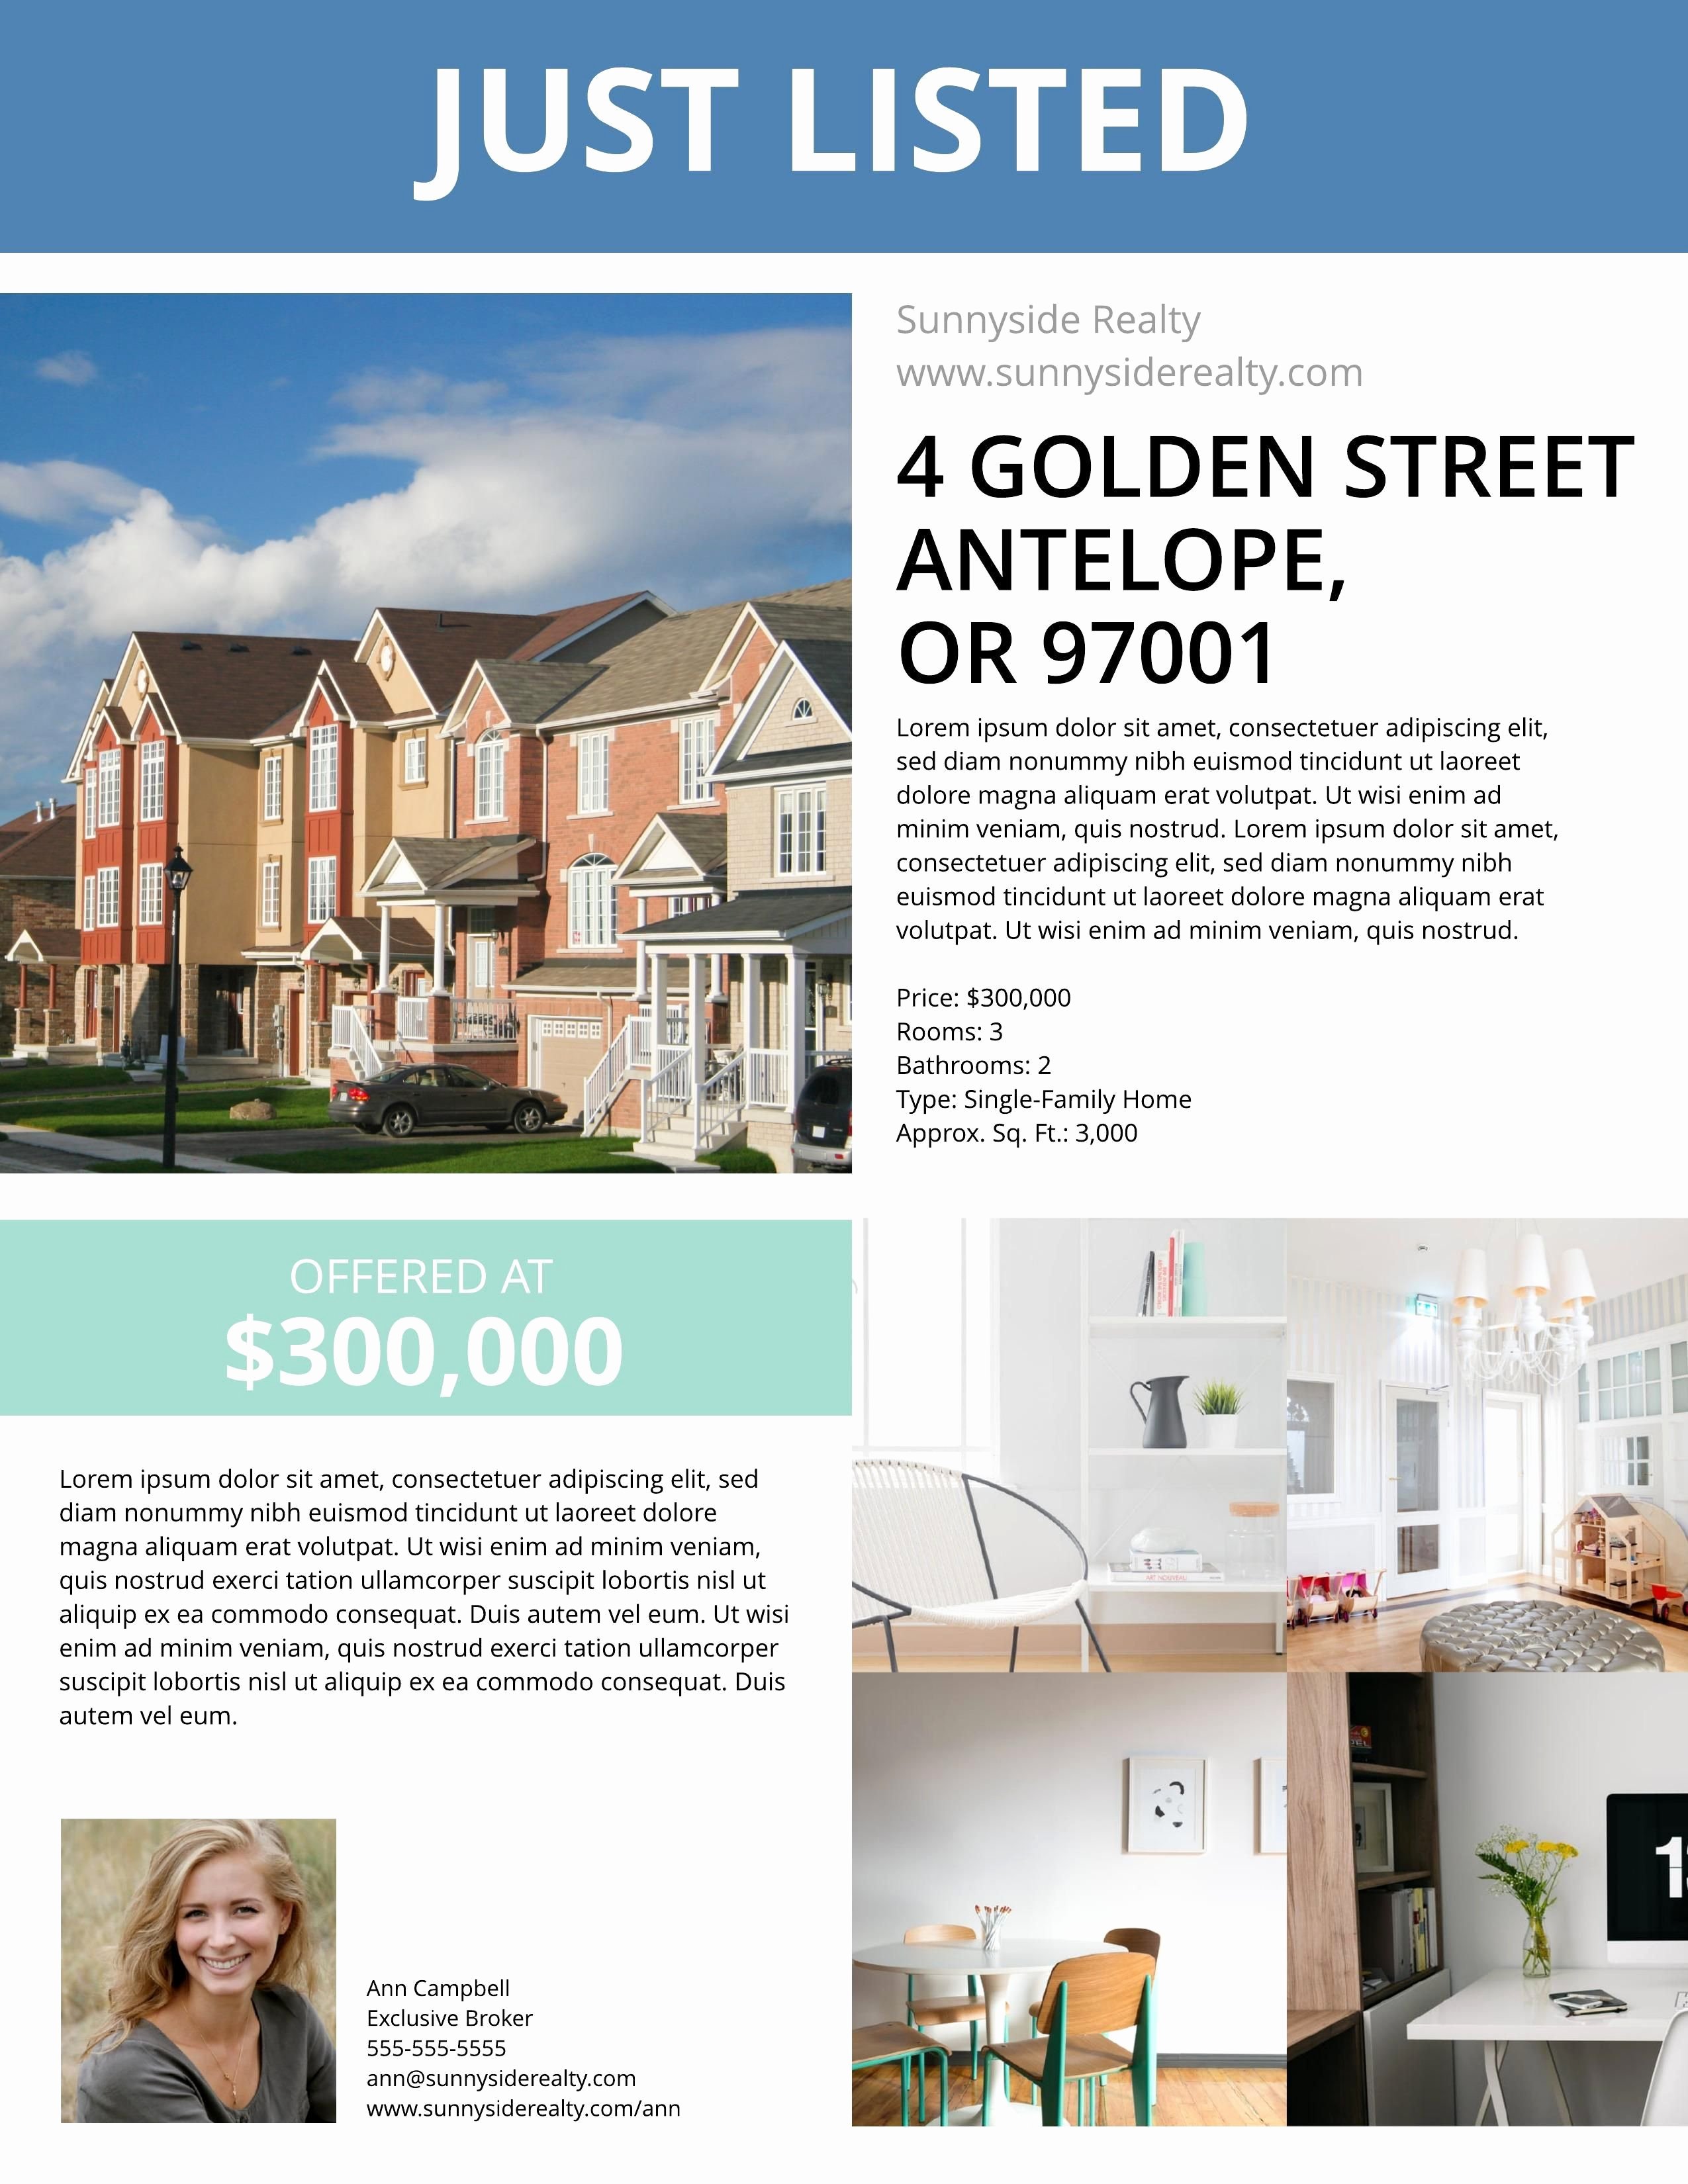 Real Estate Marketing Flyers Inspirational townhouse Listing Flyer Template